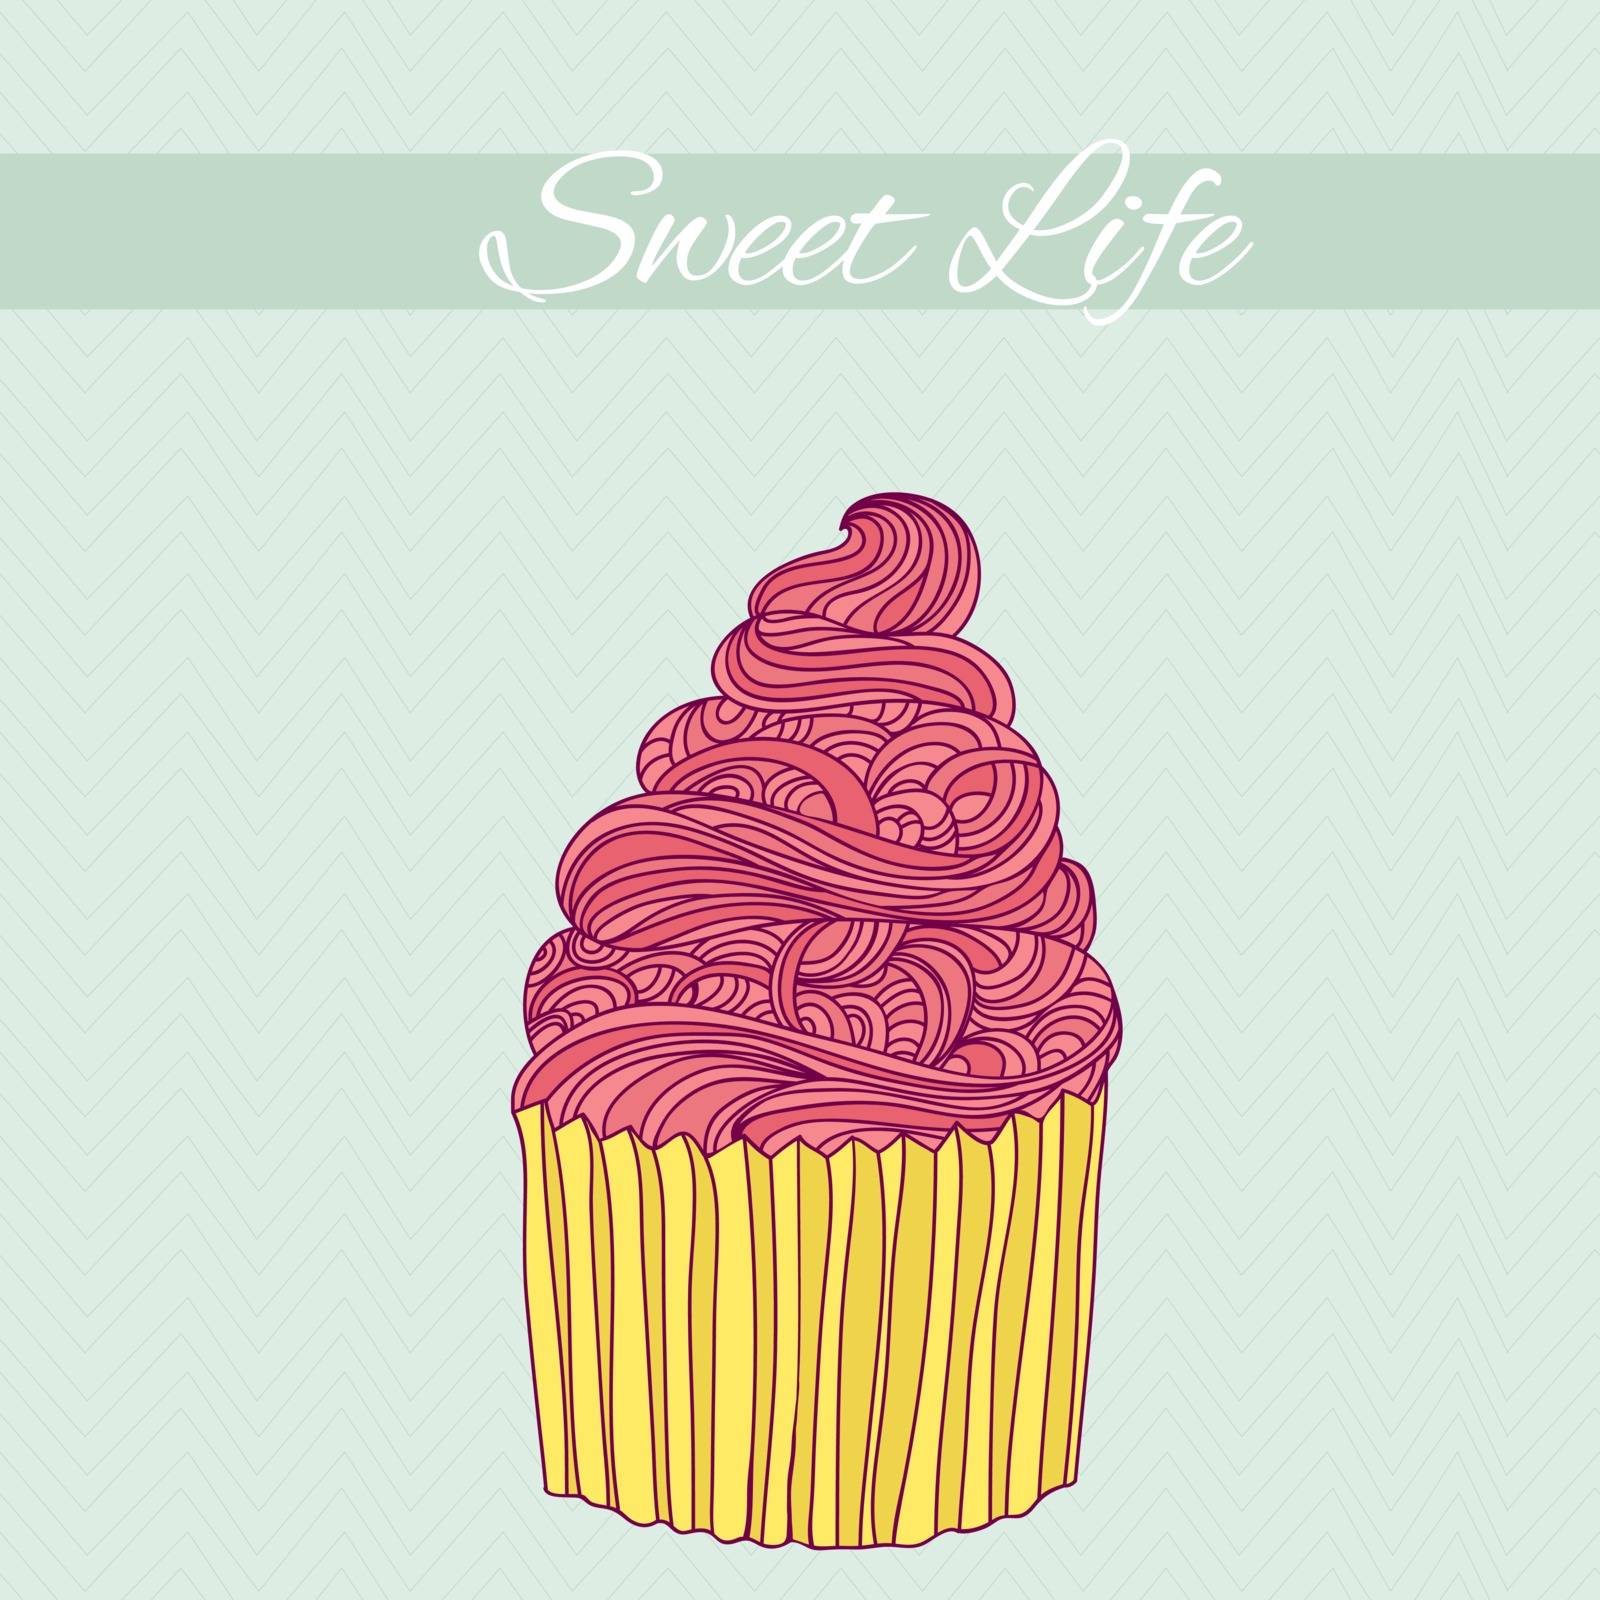 Sweet card with cupcake made in vector